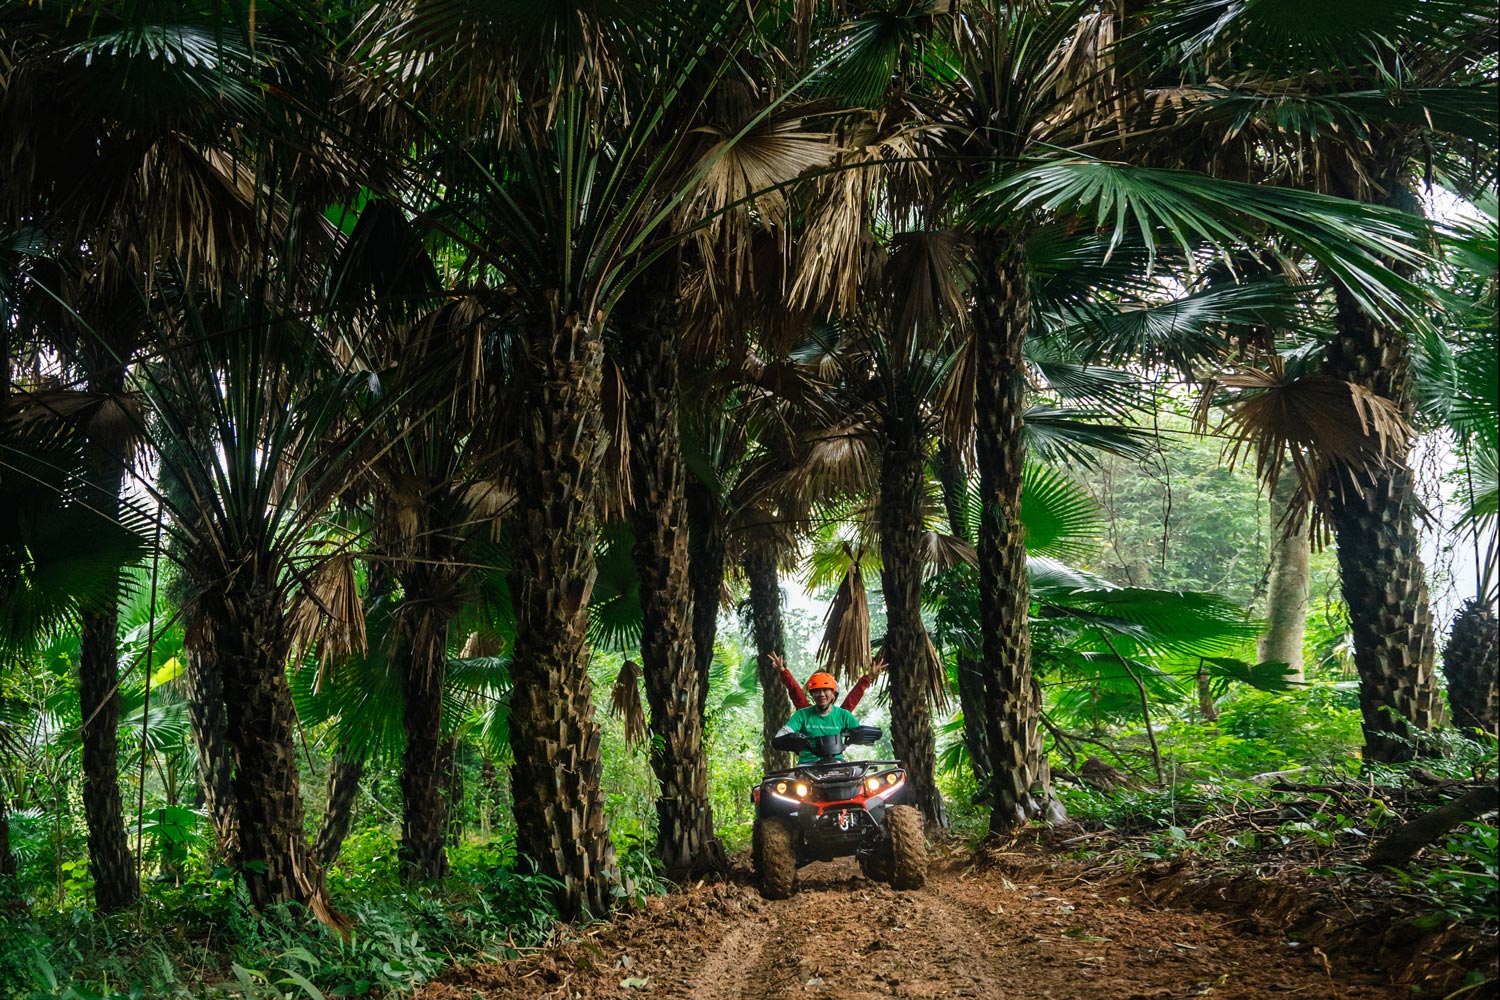 Embark on a thrilling adventure as you navigate through the enchanting Lim forest on powerful ATVs.